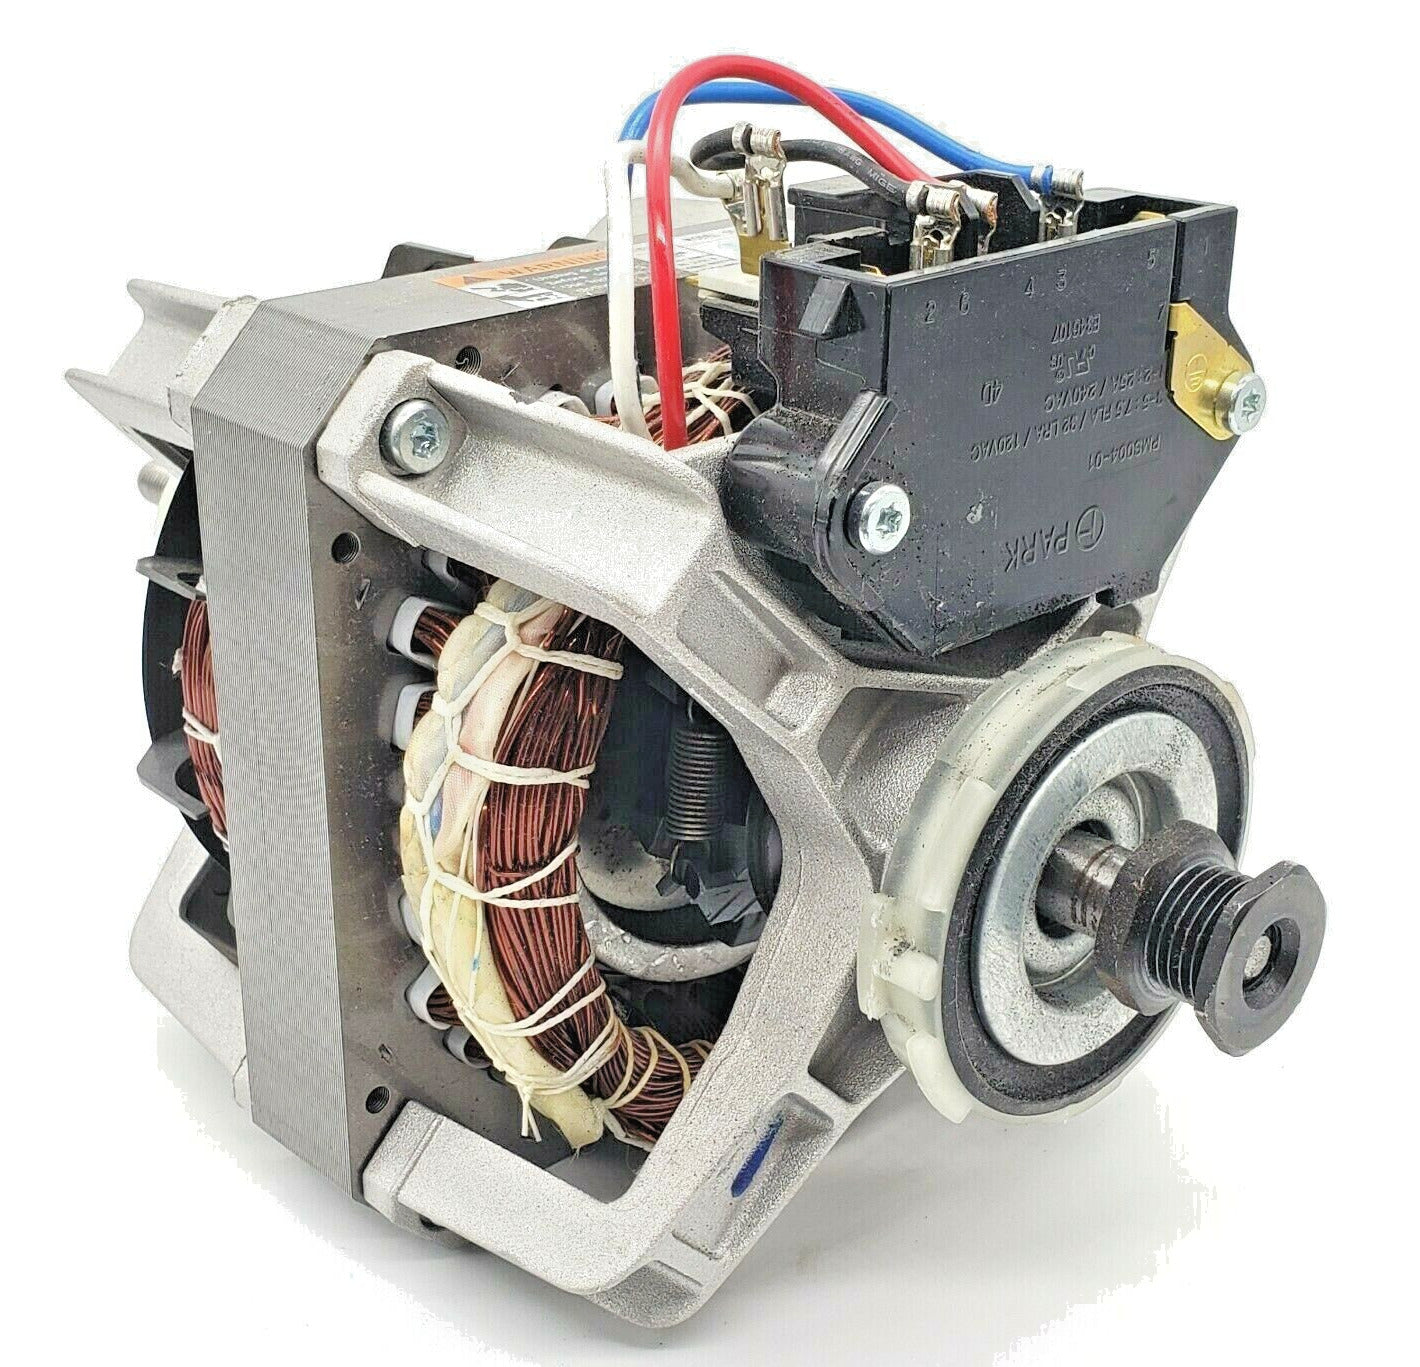 OEM Replacement for Samsung Dryer Motor 4787114439